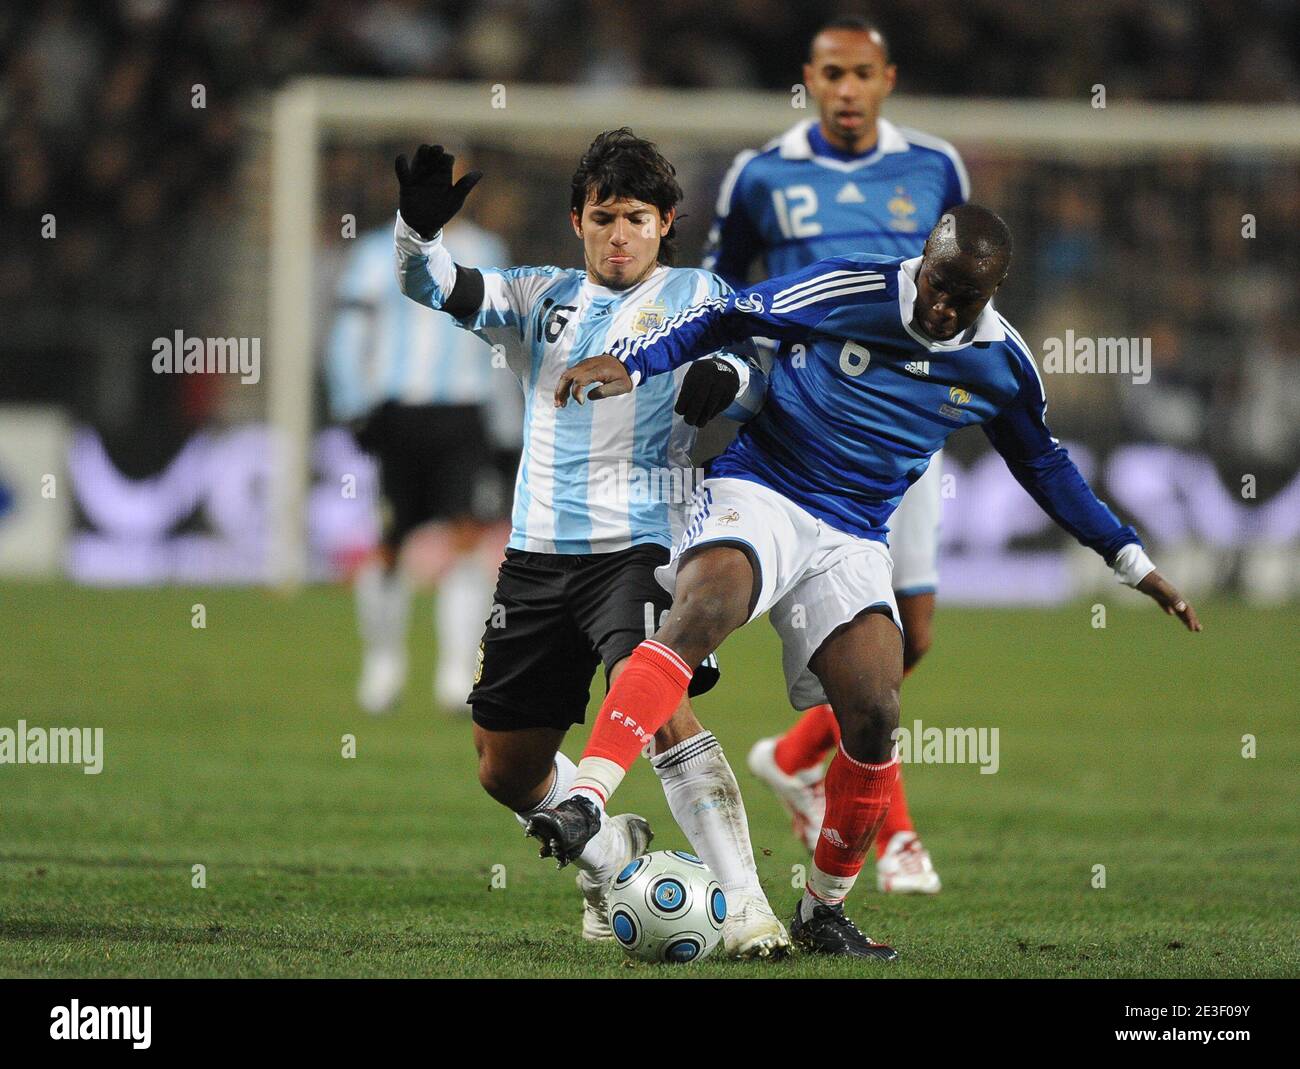 Argentina's Sergio Leonel Aguero and Argentina's Lassana Diarra during the International Friendly Soccer match, France vs Argentina at the velodrome Stadium in Marseille, France on February 11, 2009. Argentina won 2-0. Photo by Steeve McMay/ABACAPRESS.COM Stock Photo